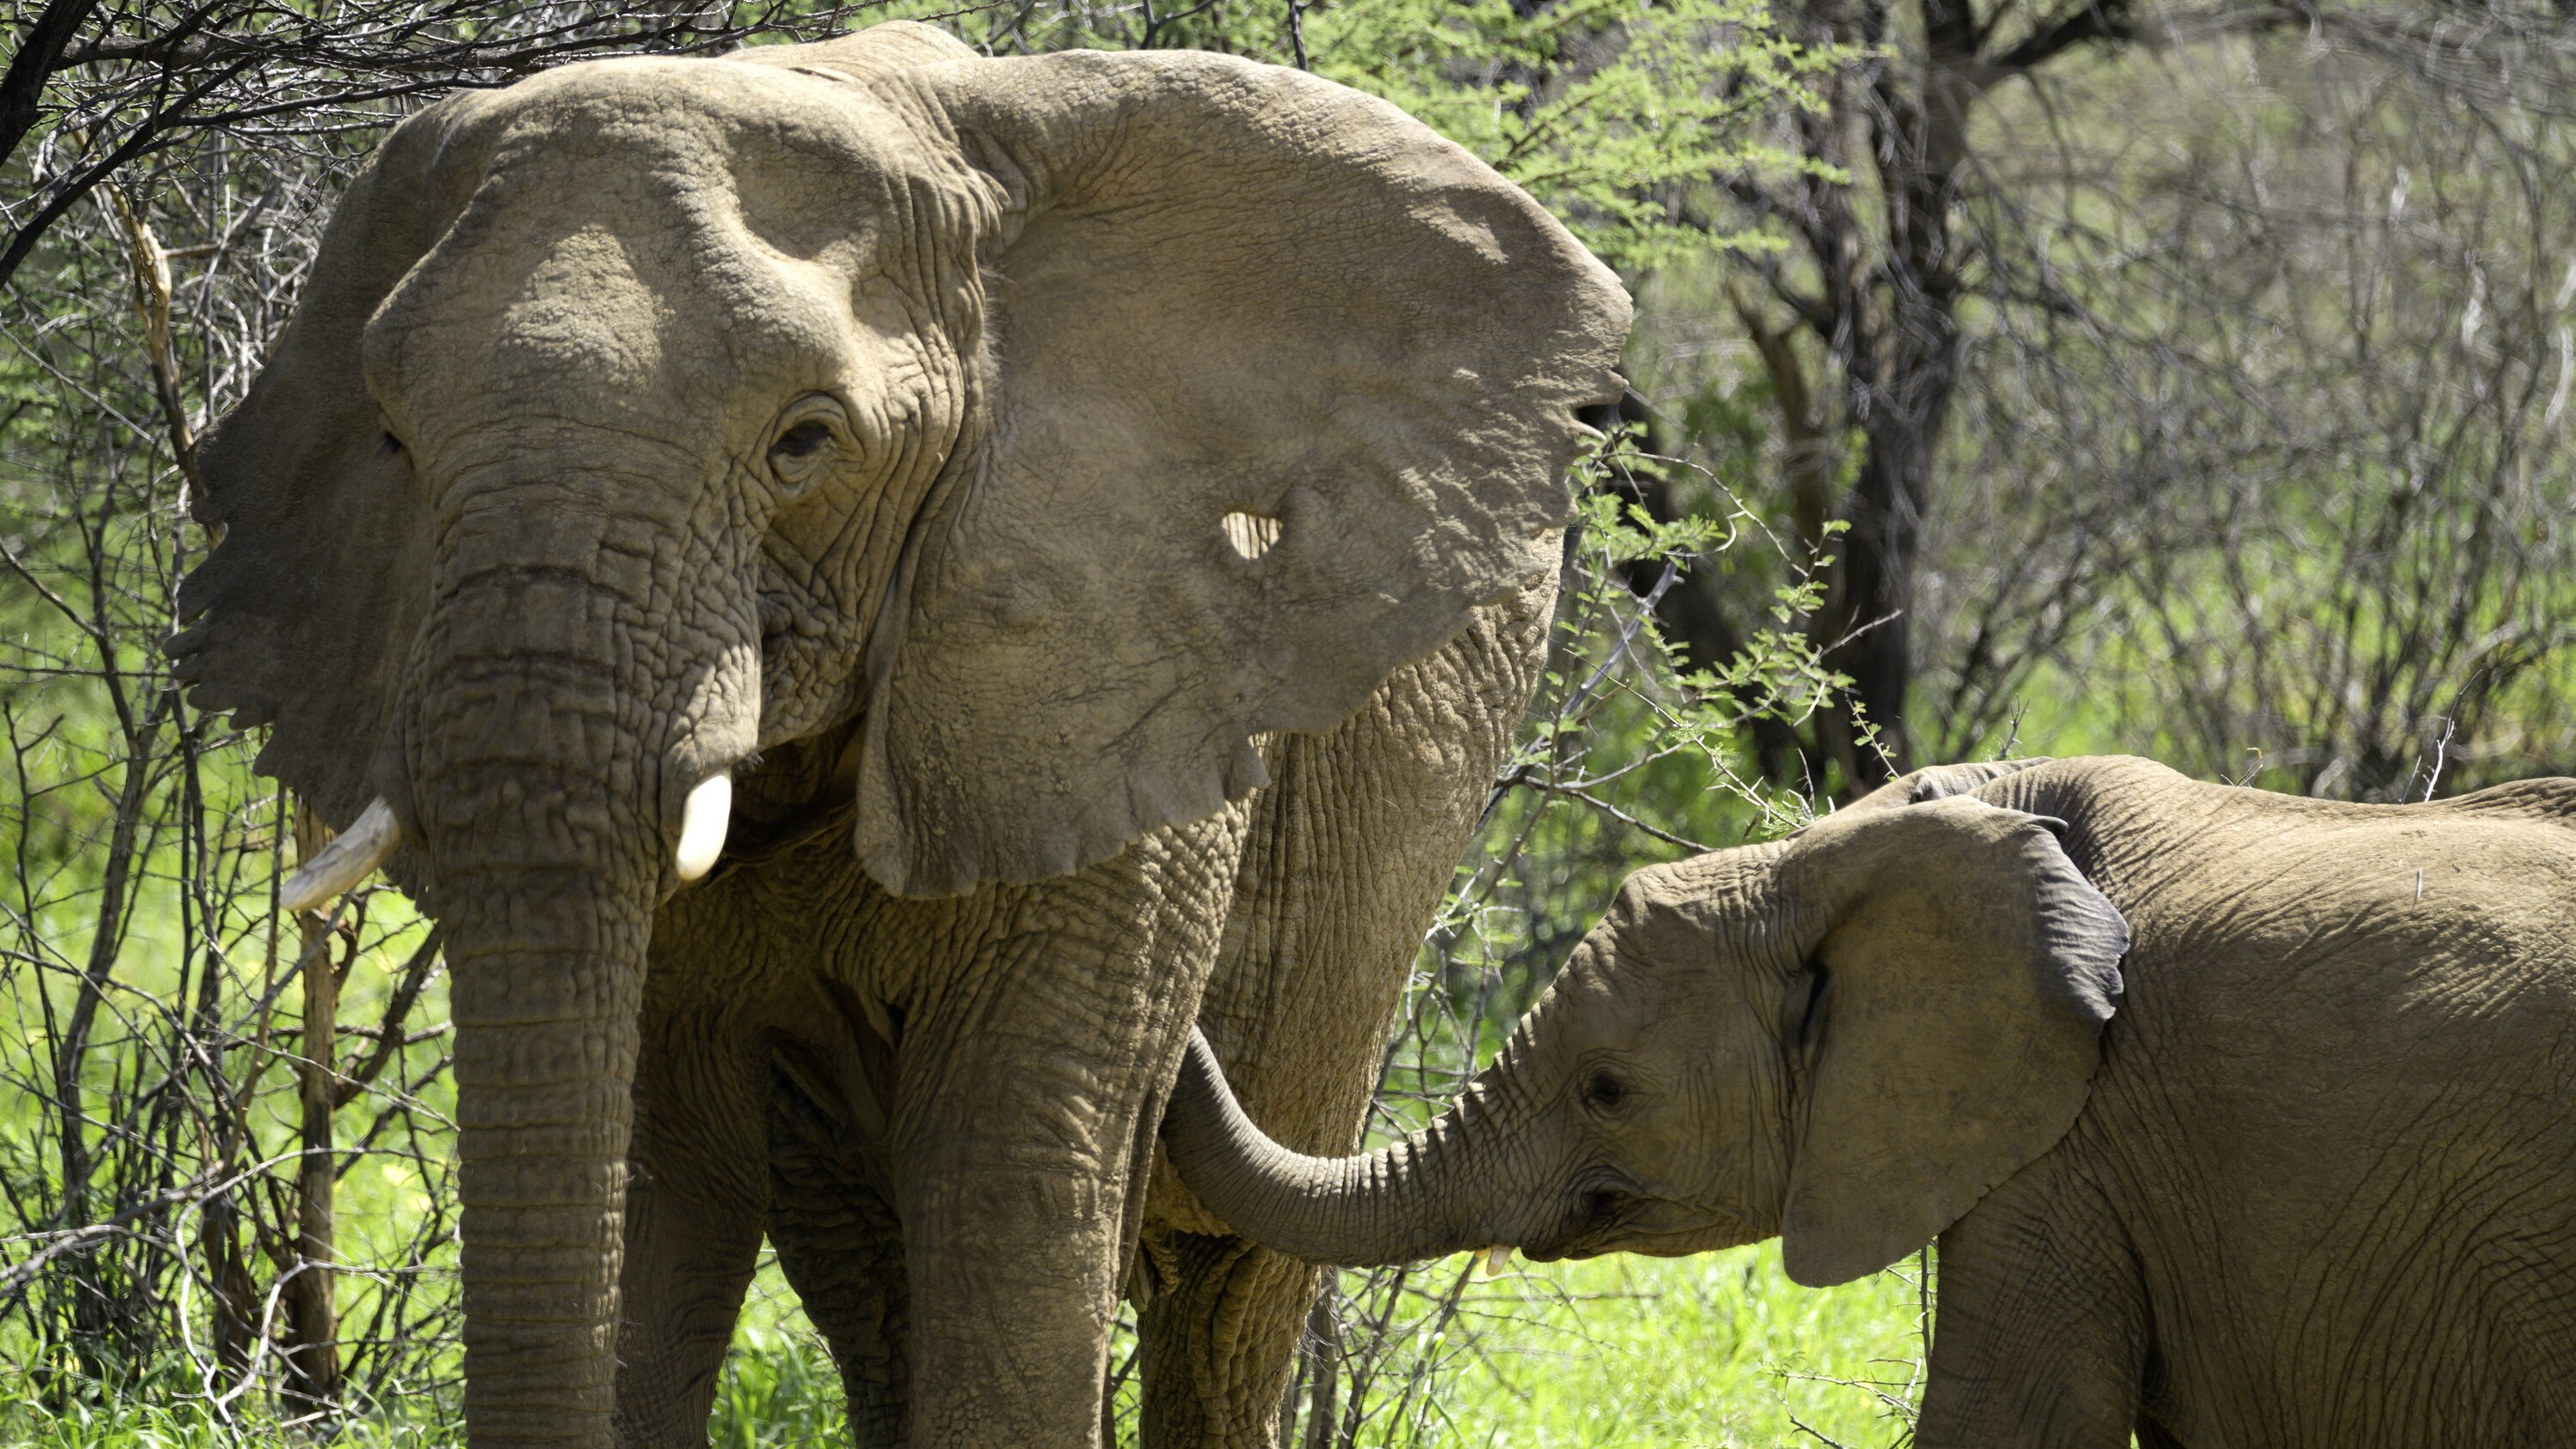 Max looping his trunk towards the Matriarch, Khanyisa. (National Geographic for Disney+/Melanie Gerry)